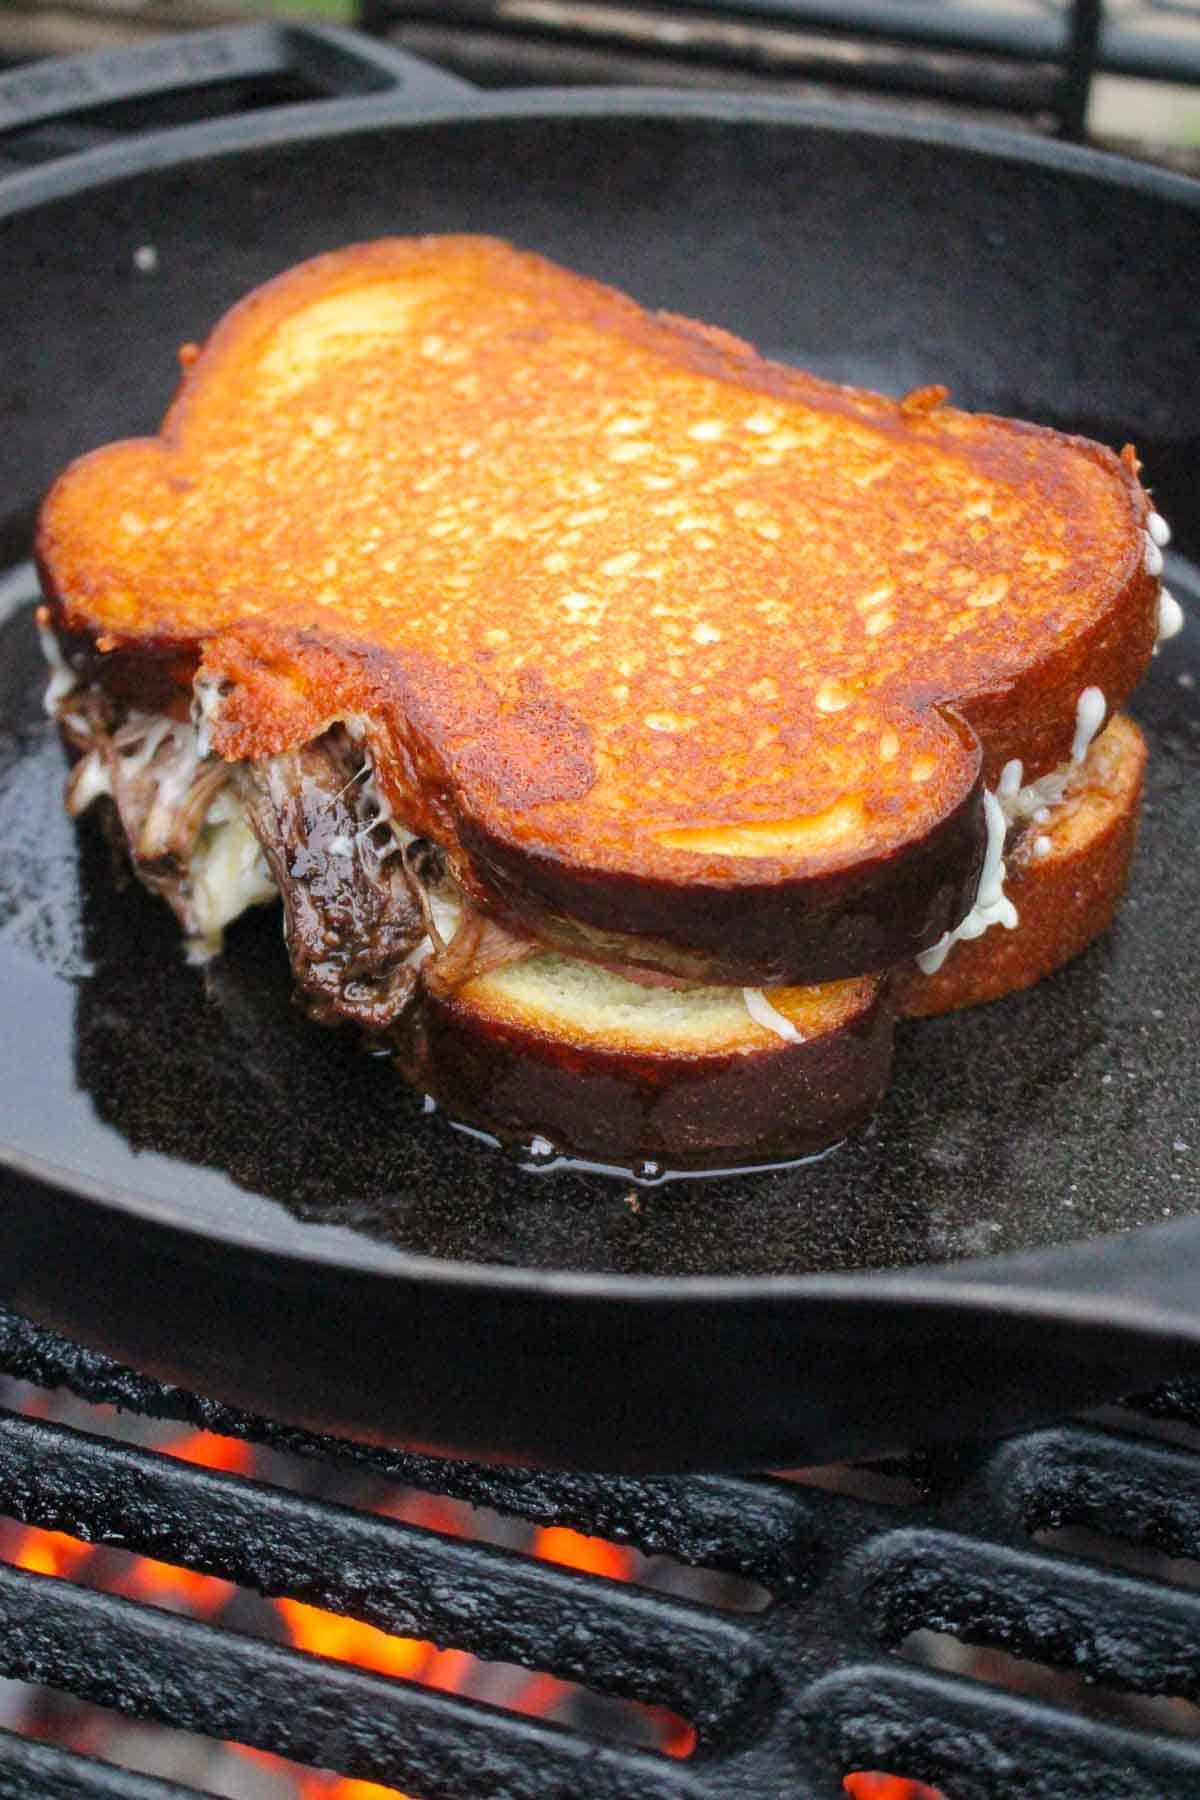 One of the sandwiches after being flipped on the grill.